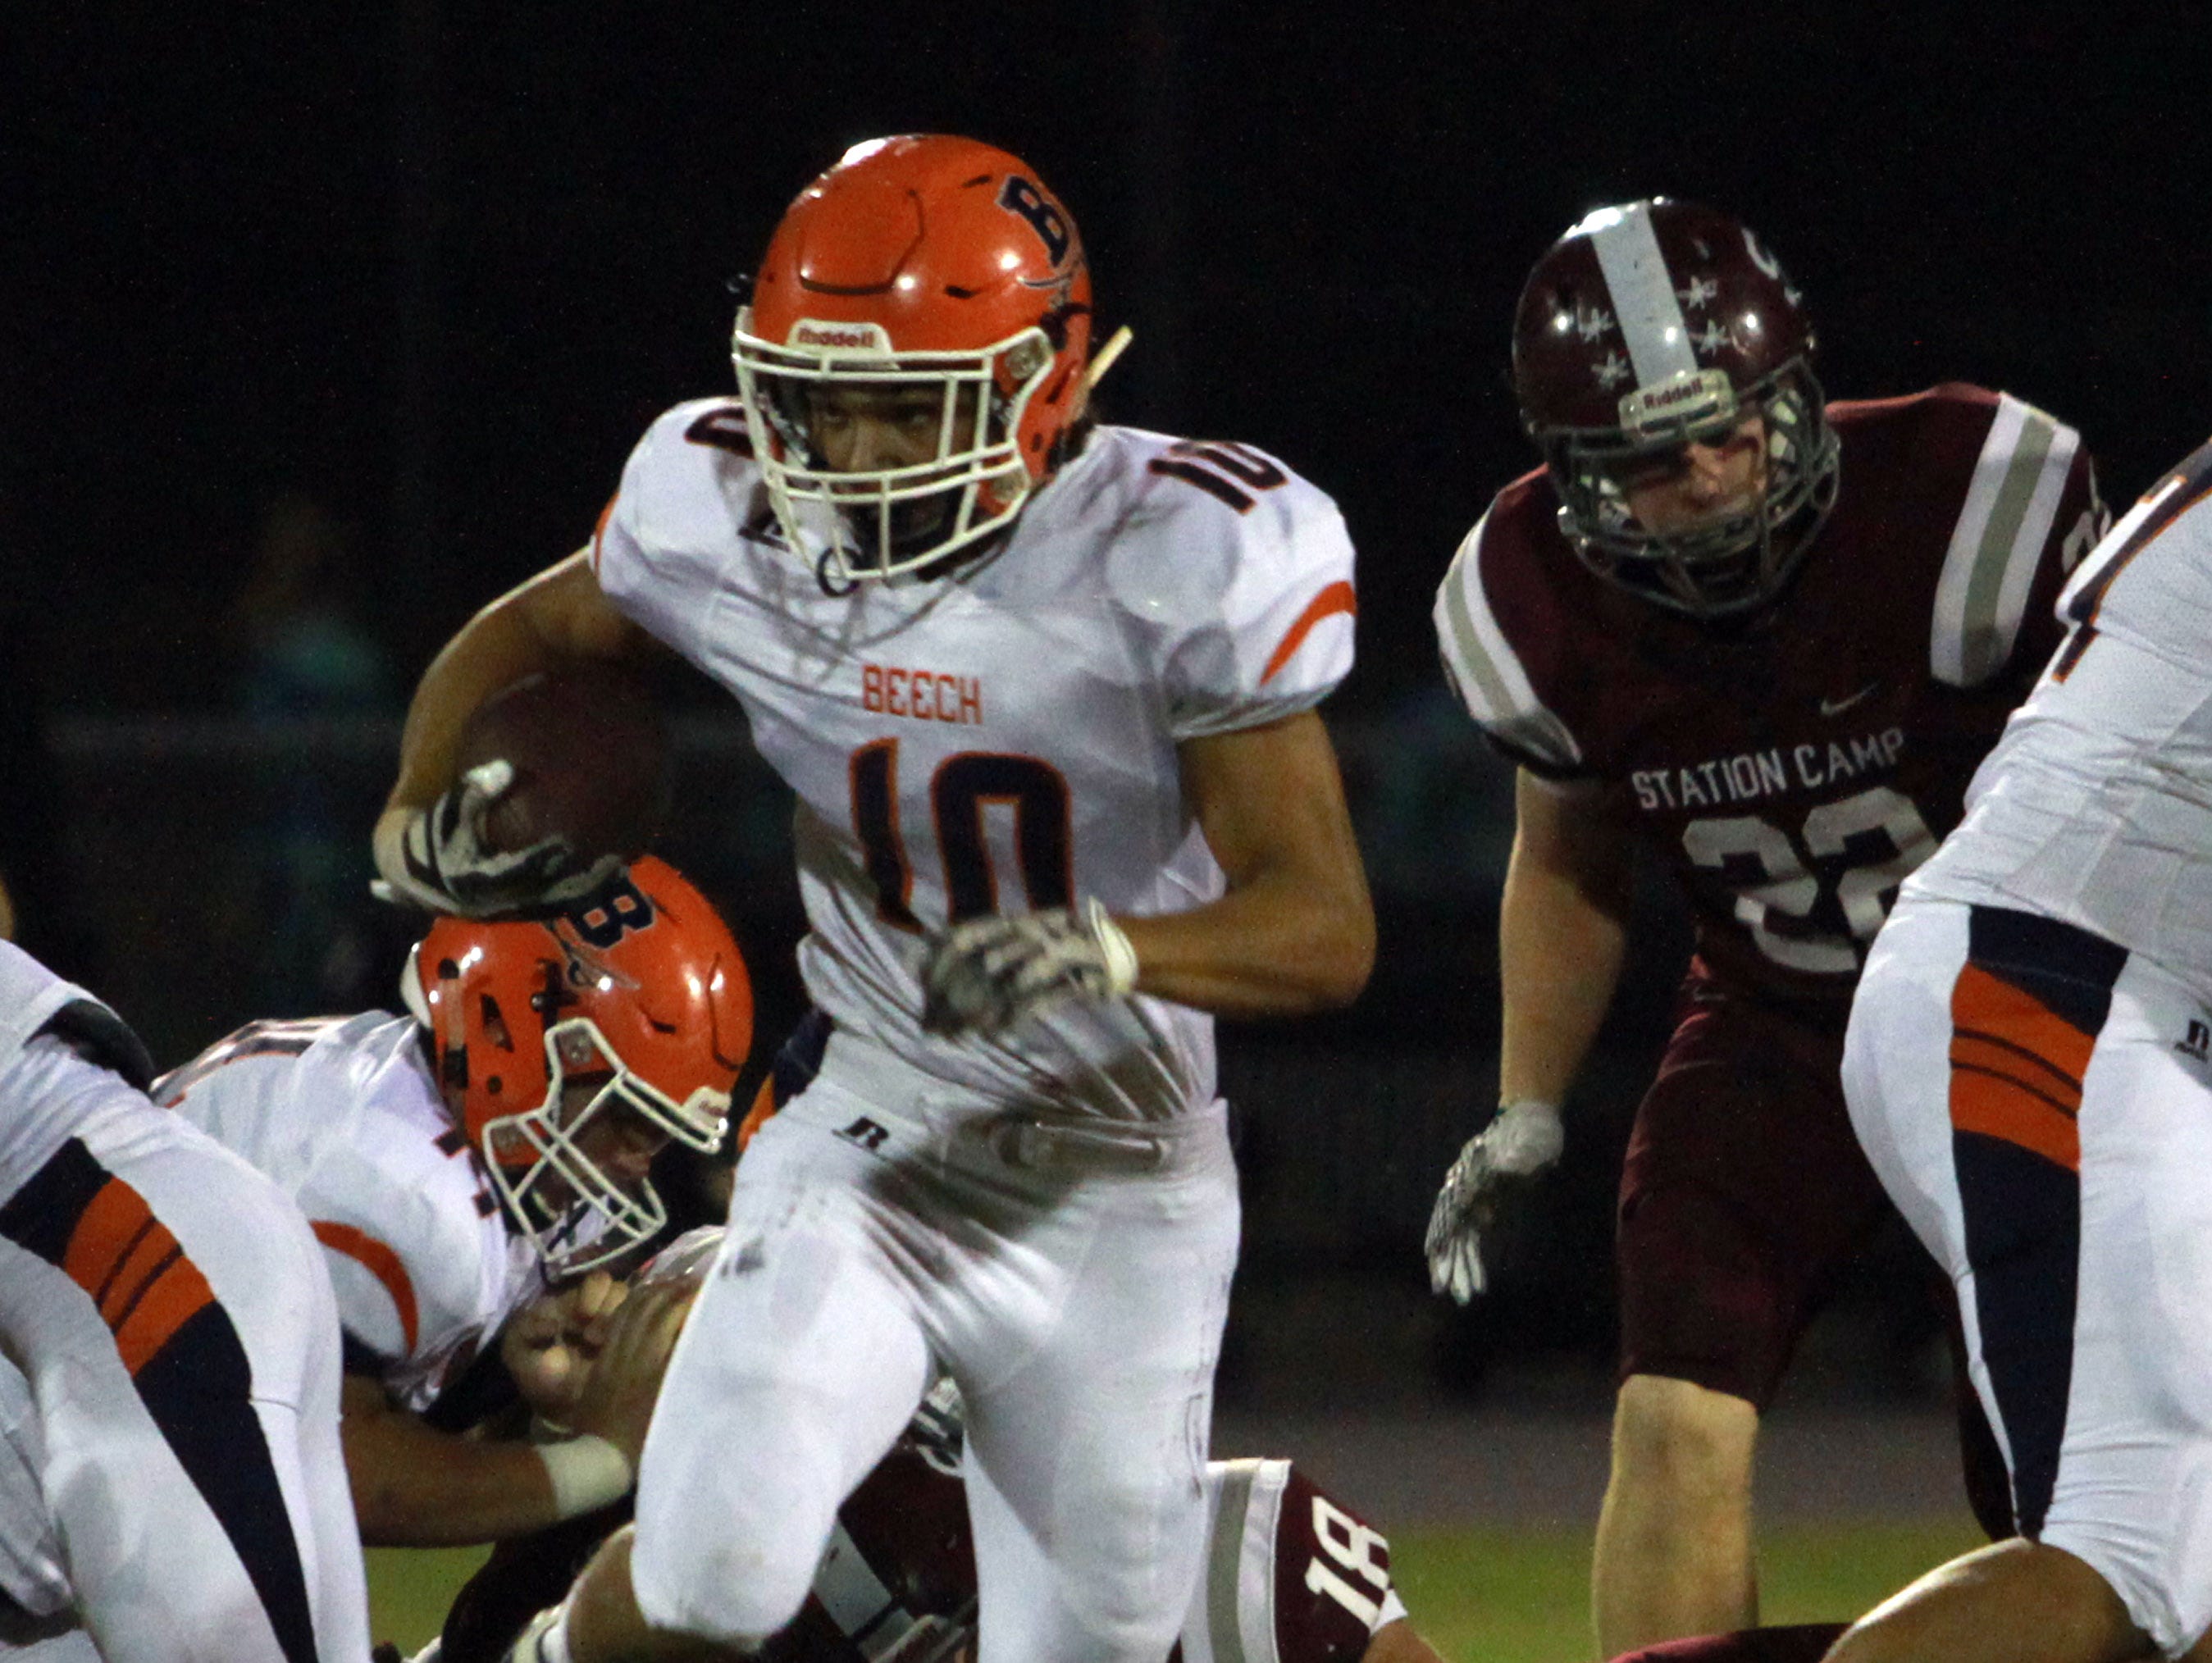 Beech's Chaz Williamson finds a hole to rush through during Friday's game at Station Camp.